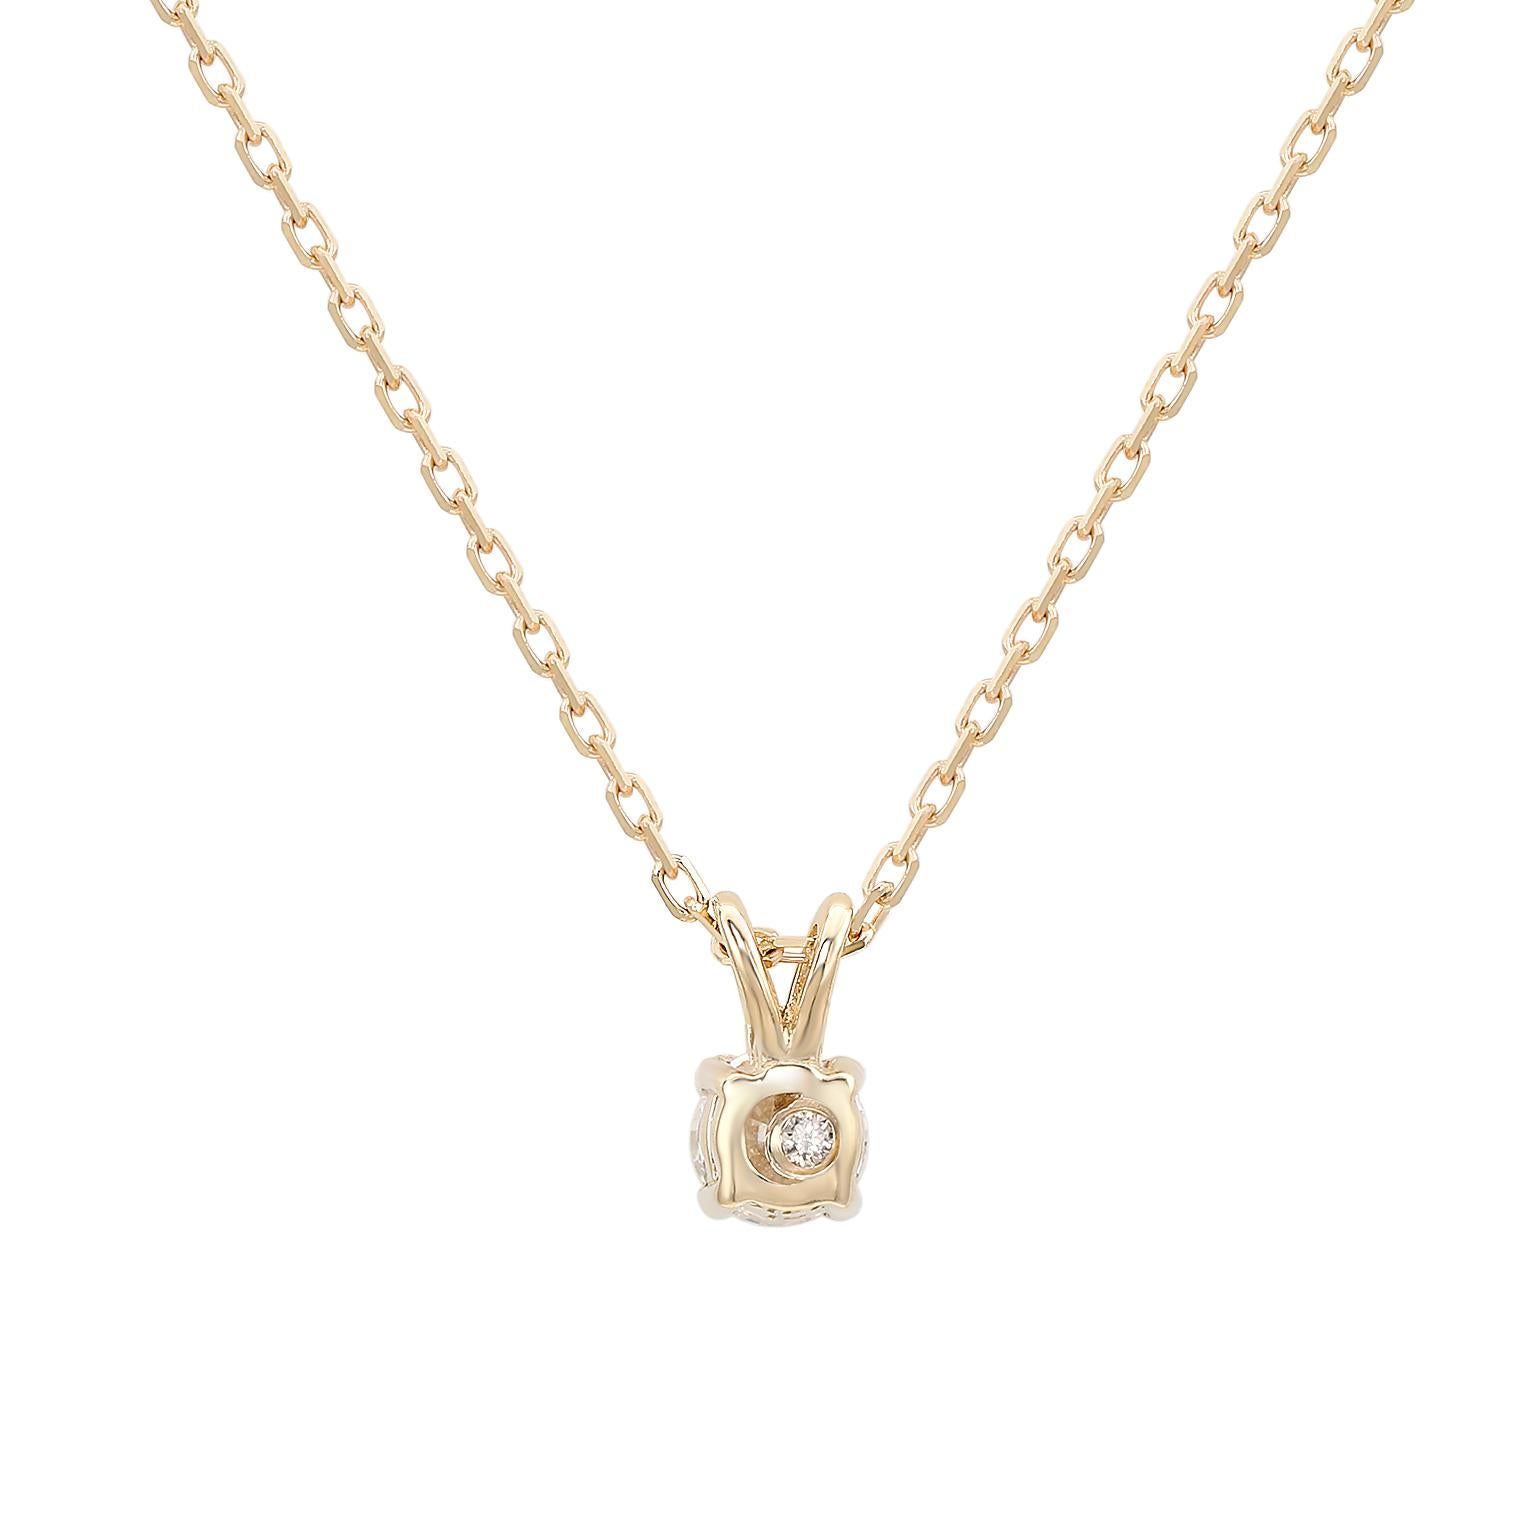 Add an elegant accent to your outfit with this sparkling Suzy Levian solitaire pendant necklace featuring a single gorgeous white diamonds in a split bail prong setting. The sparkling diamond are hand set in 14-karat yellow gold, and weigh 0.26ctw